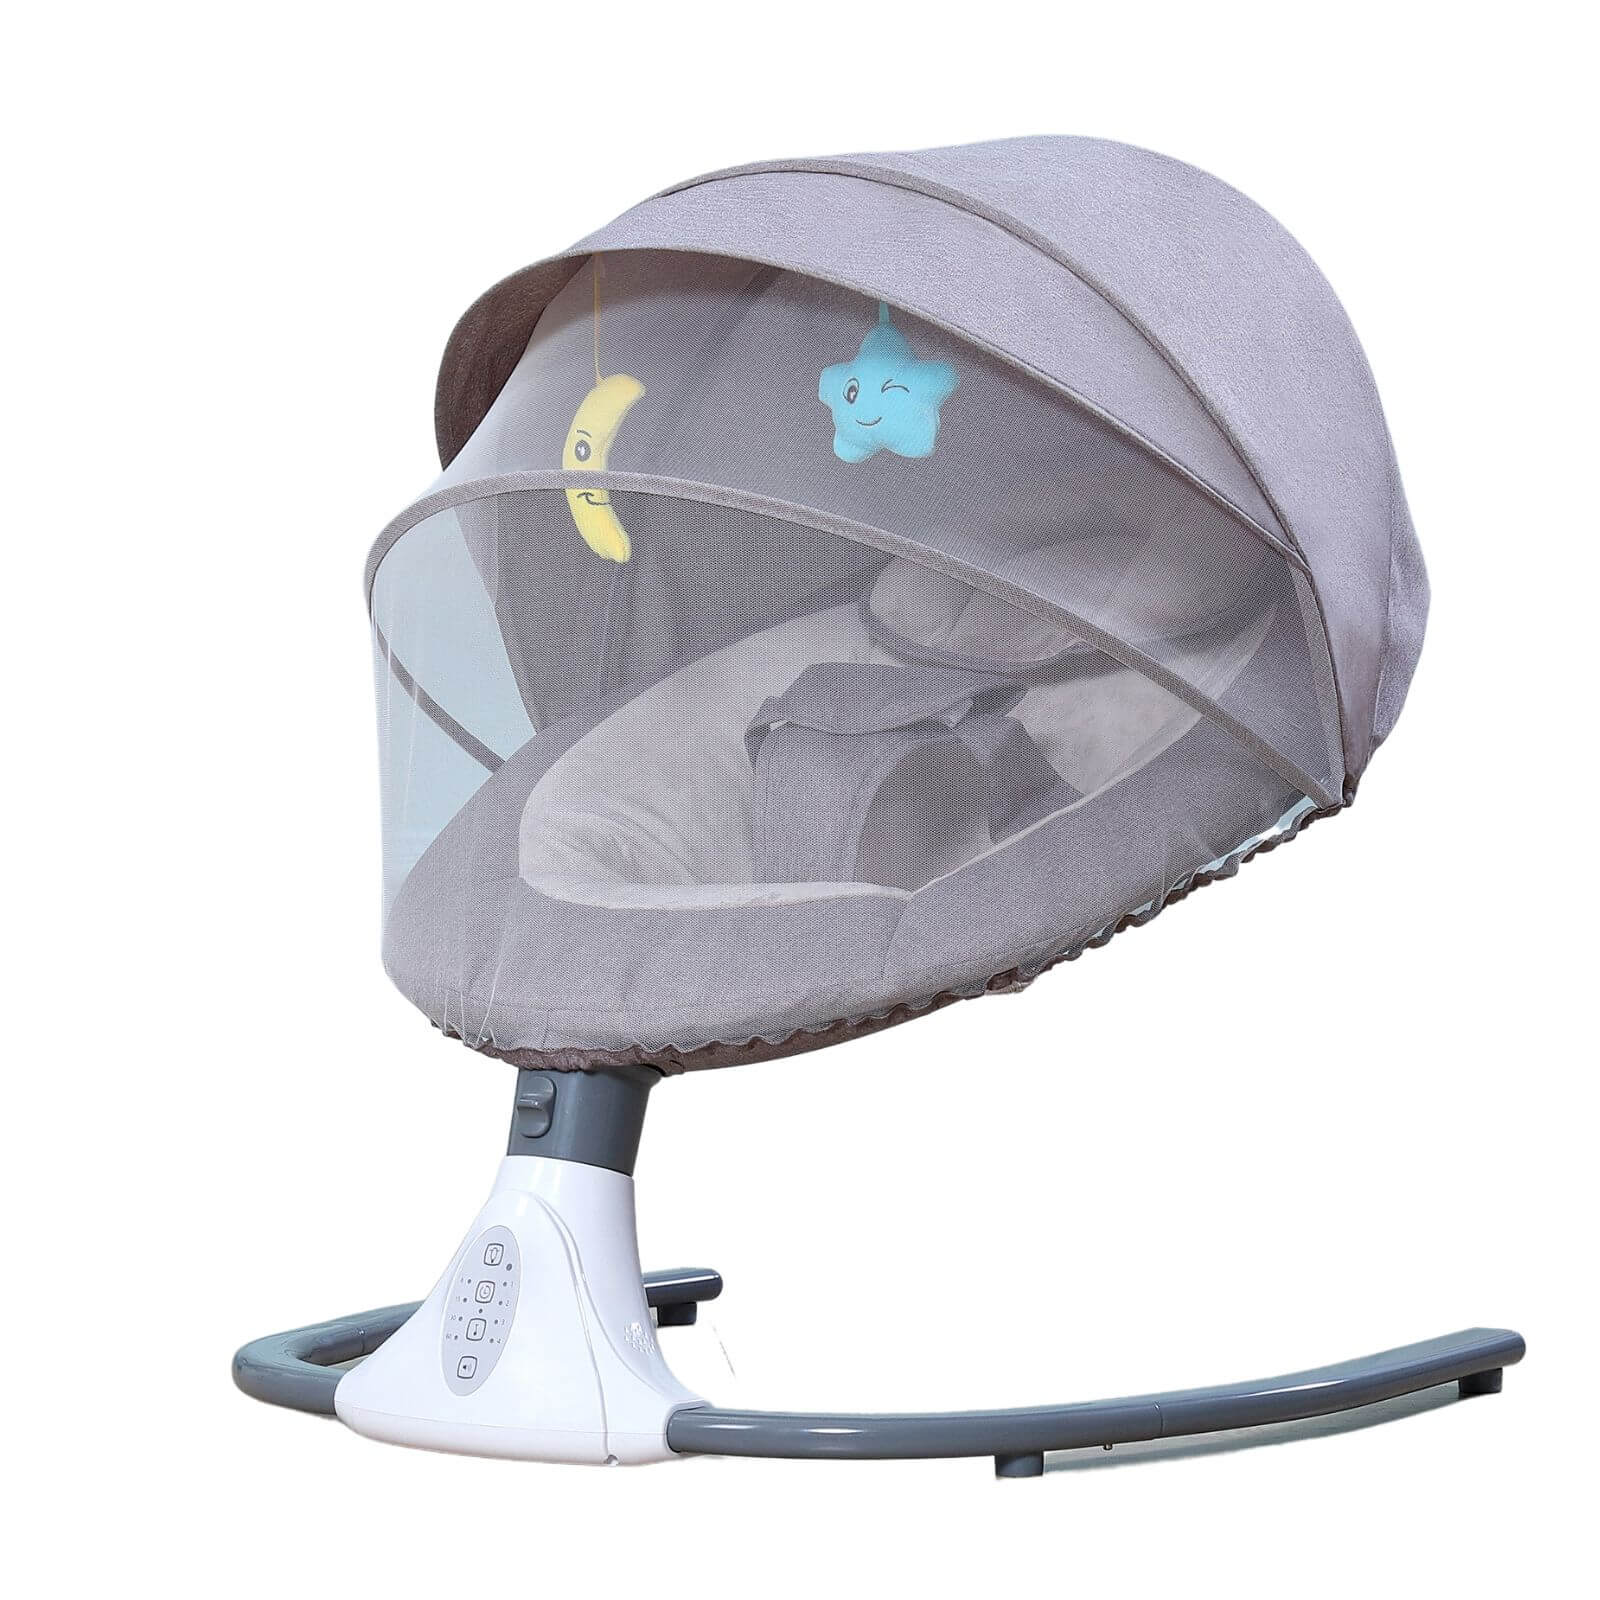 Smart Baby Swing Cradle Rocker Bed/ Bouncer Seat Infant Crib Remote Chair -Grey